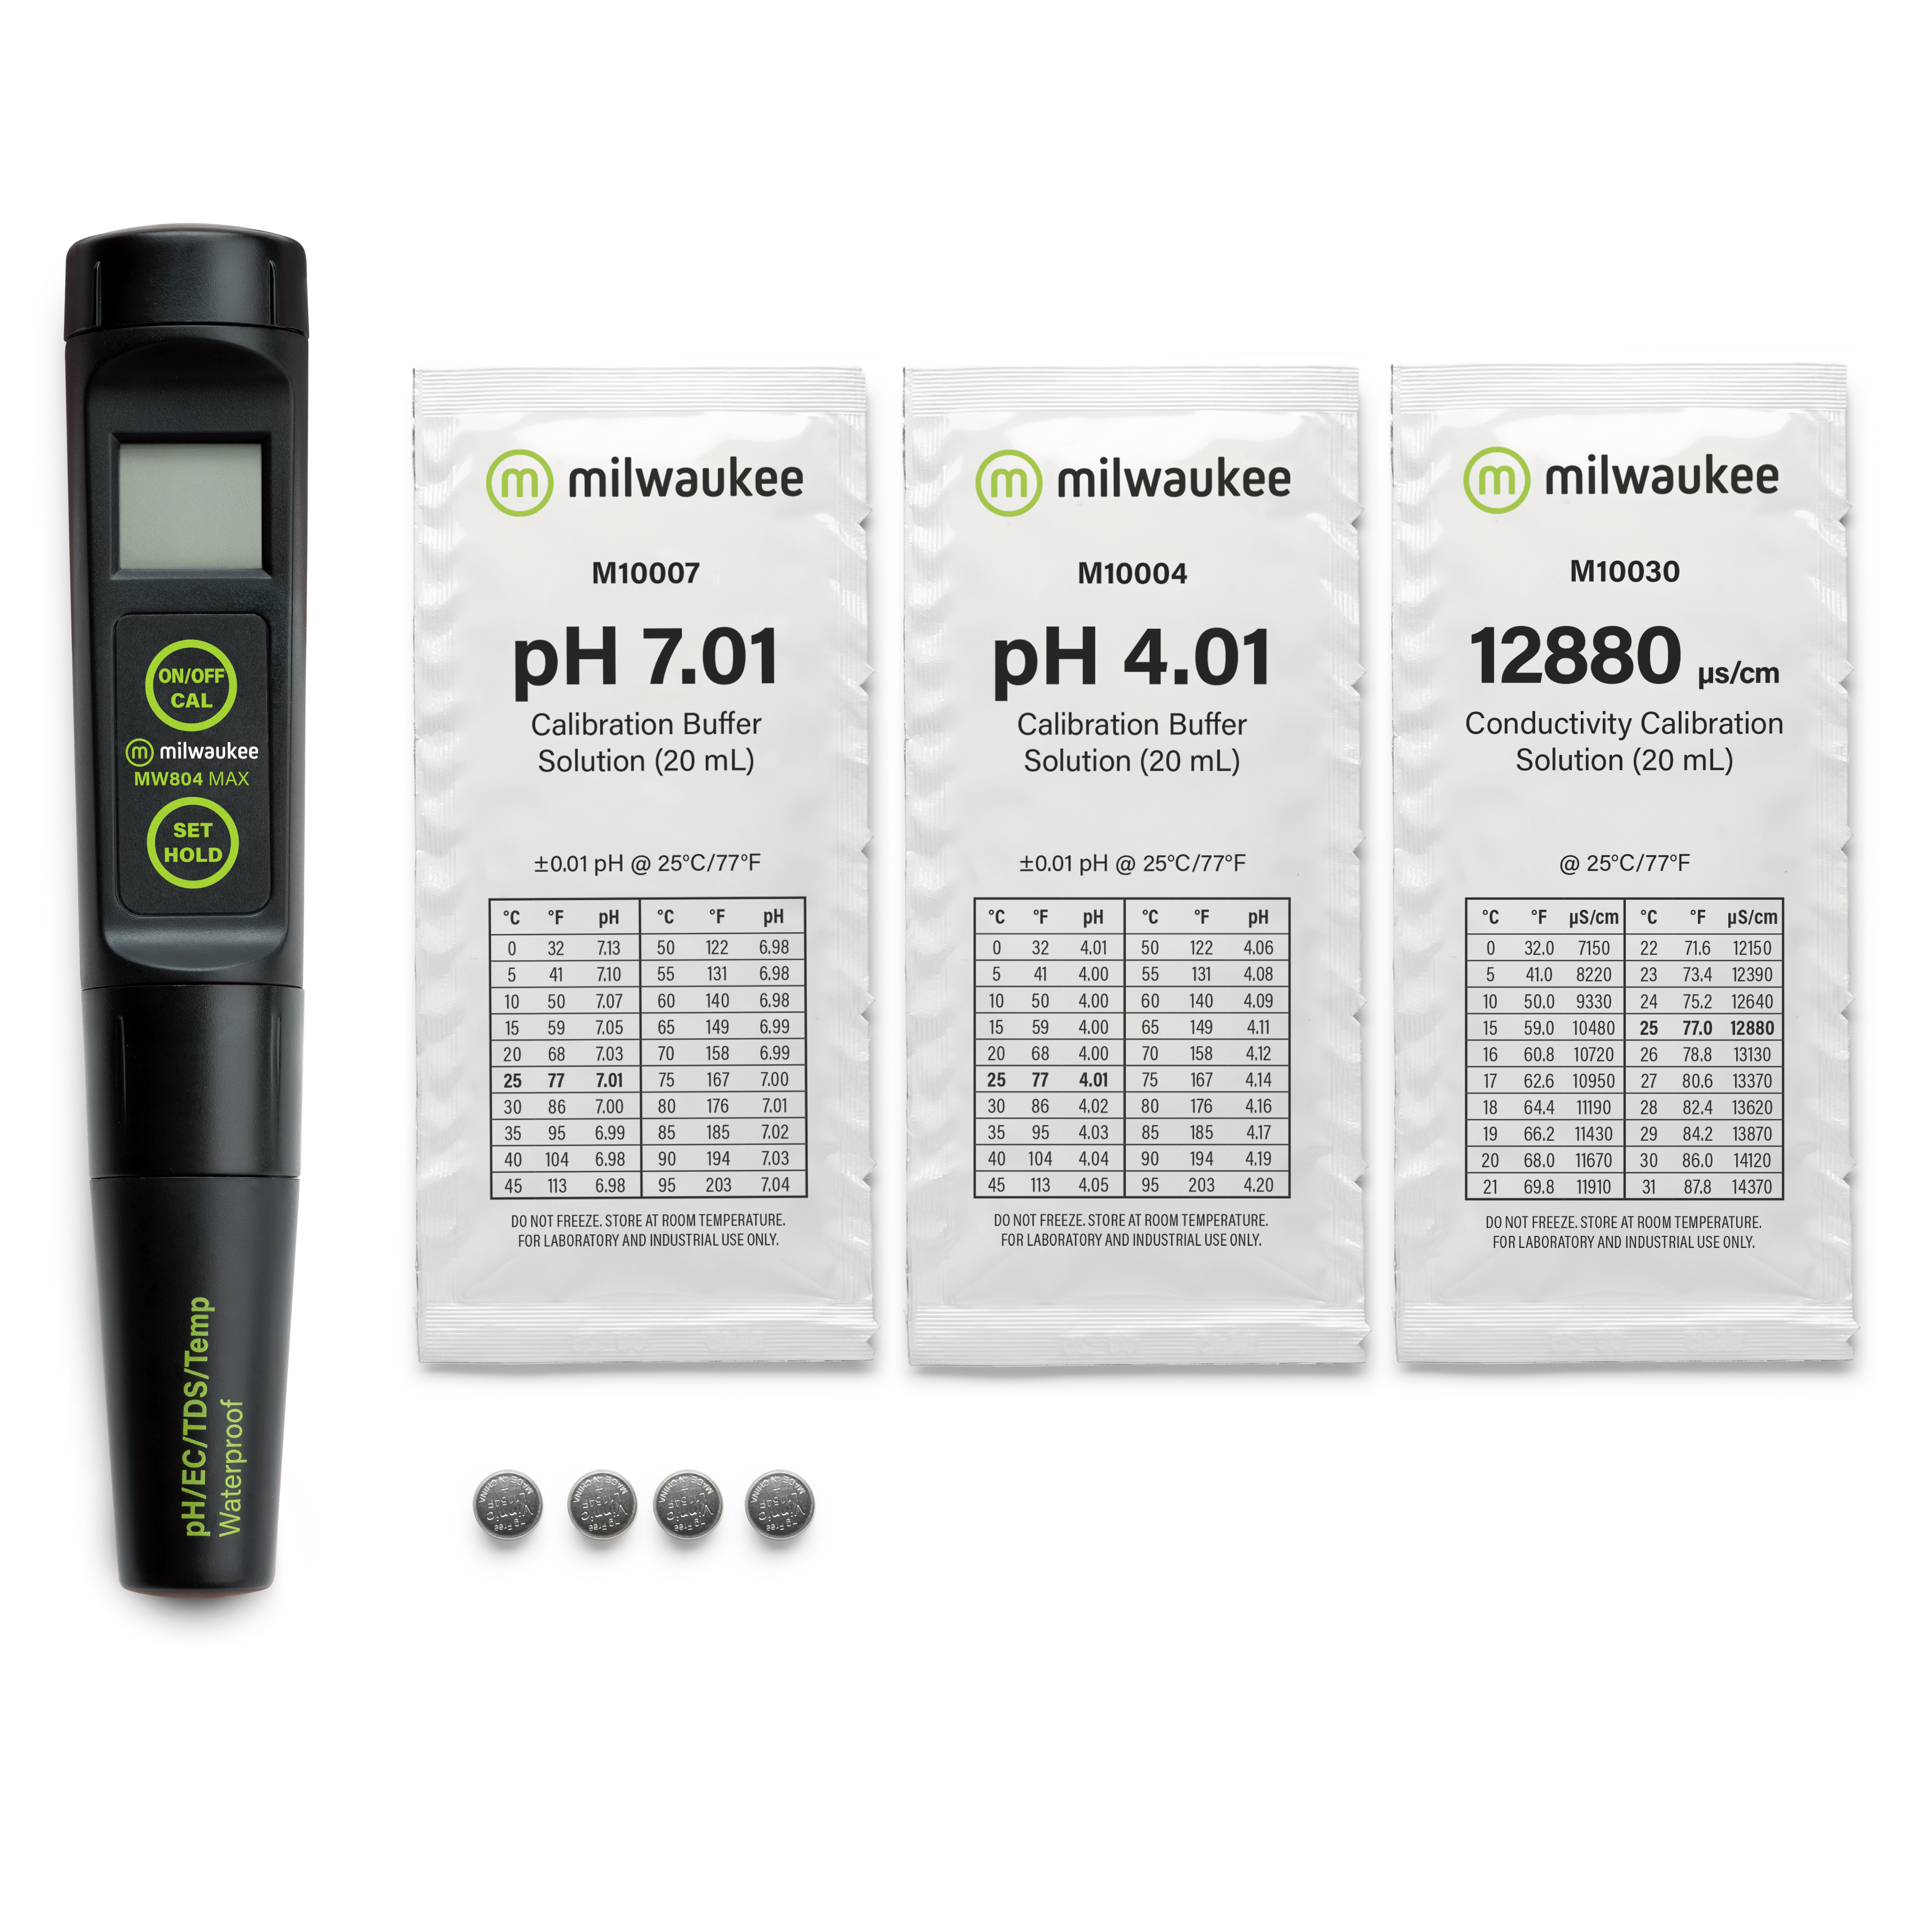 Milwaukee MW804 MAX Waterproof 4-in-1 pH / EC / TDS/Temp Tester with Replaceable Probe